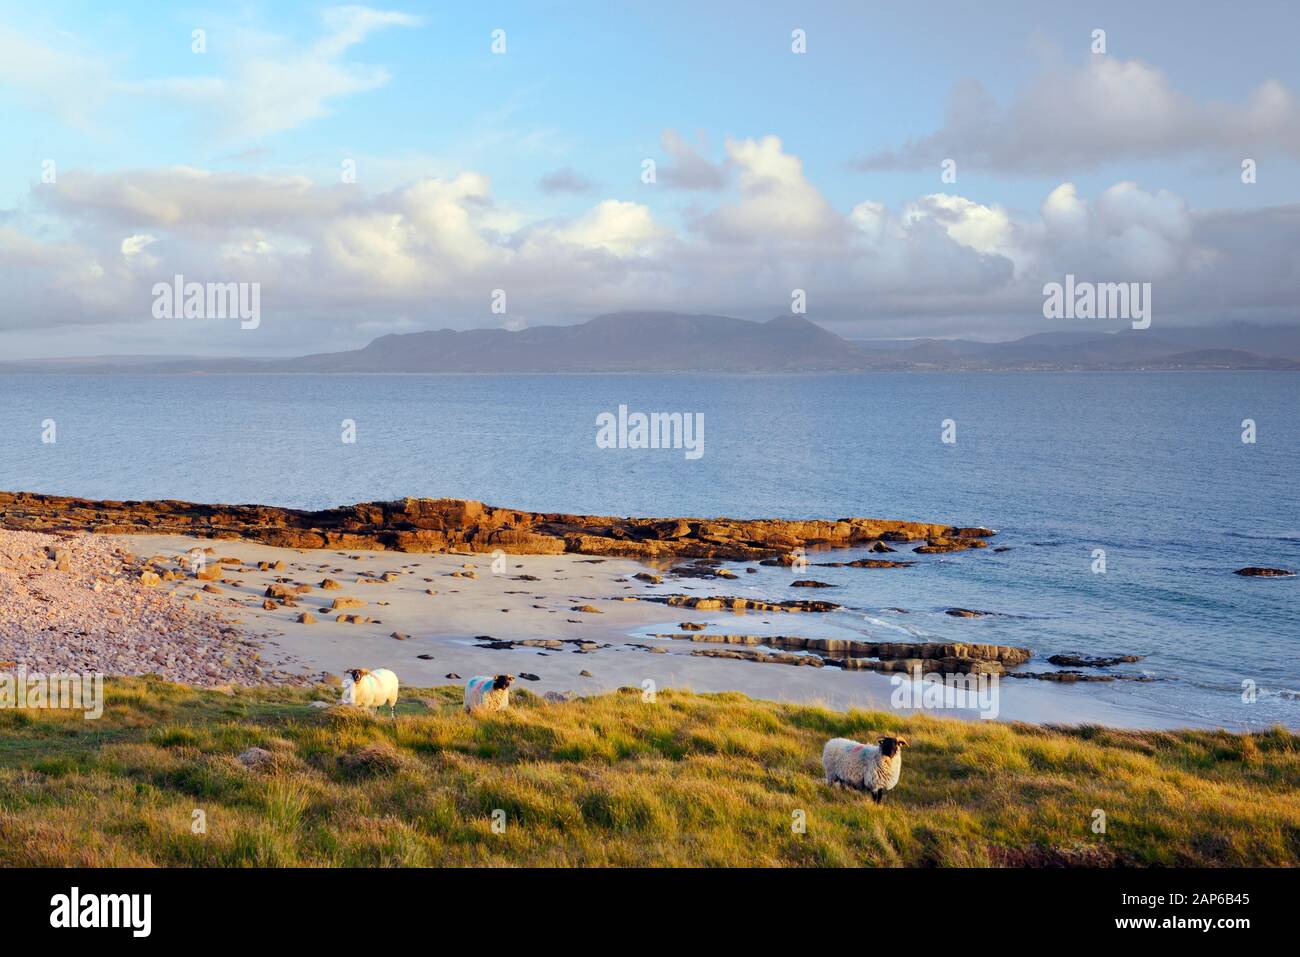 Clew Bay. South East from the north coast of Clew Bay to Croagh Patrick sacred mountain in County Mayo, Connacht, Ireland Stock Photo